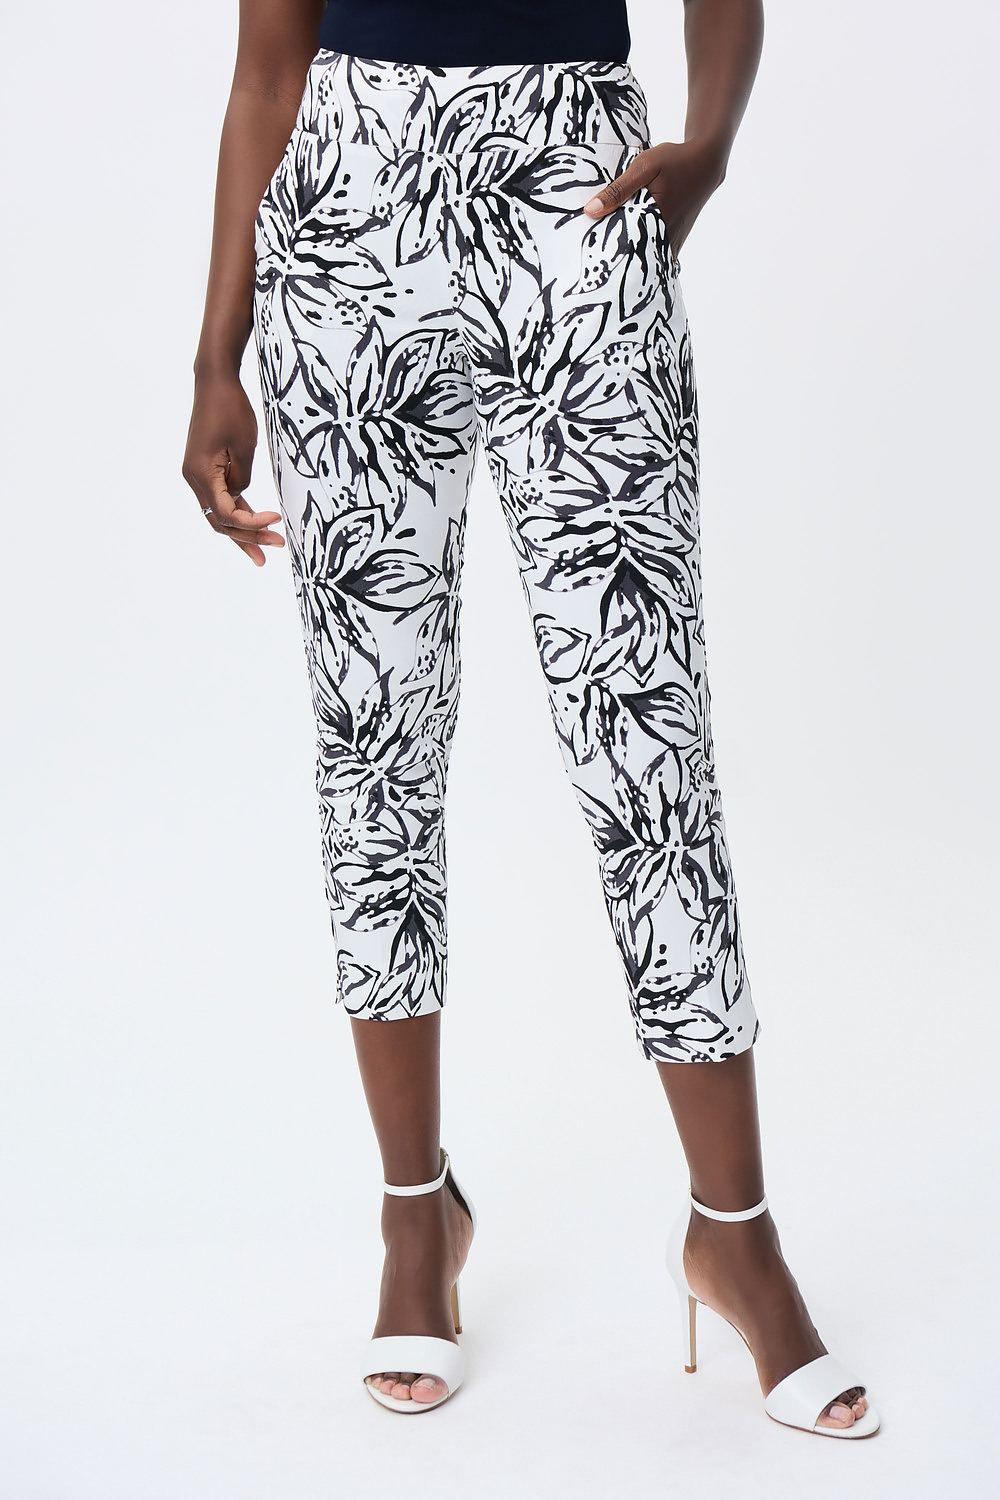 Printed Cropped Microtwill Pants Style 231030. Vanilla/black